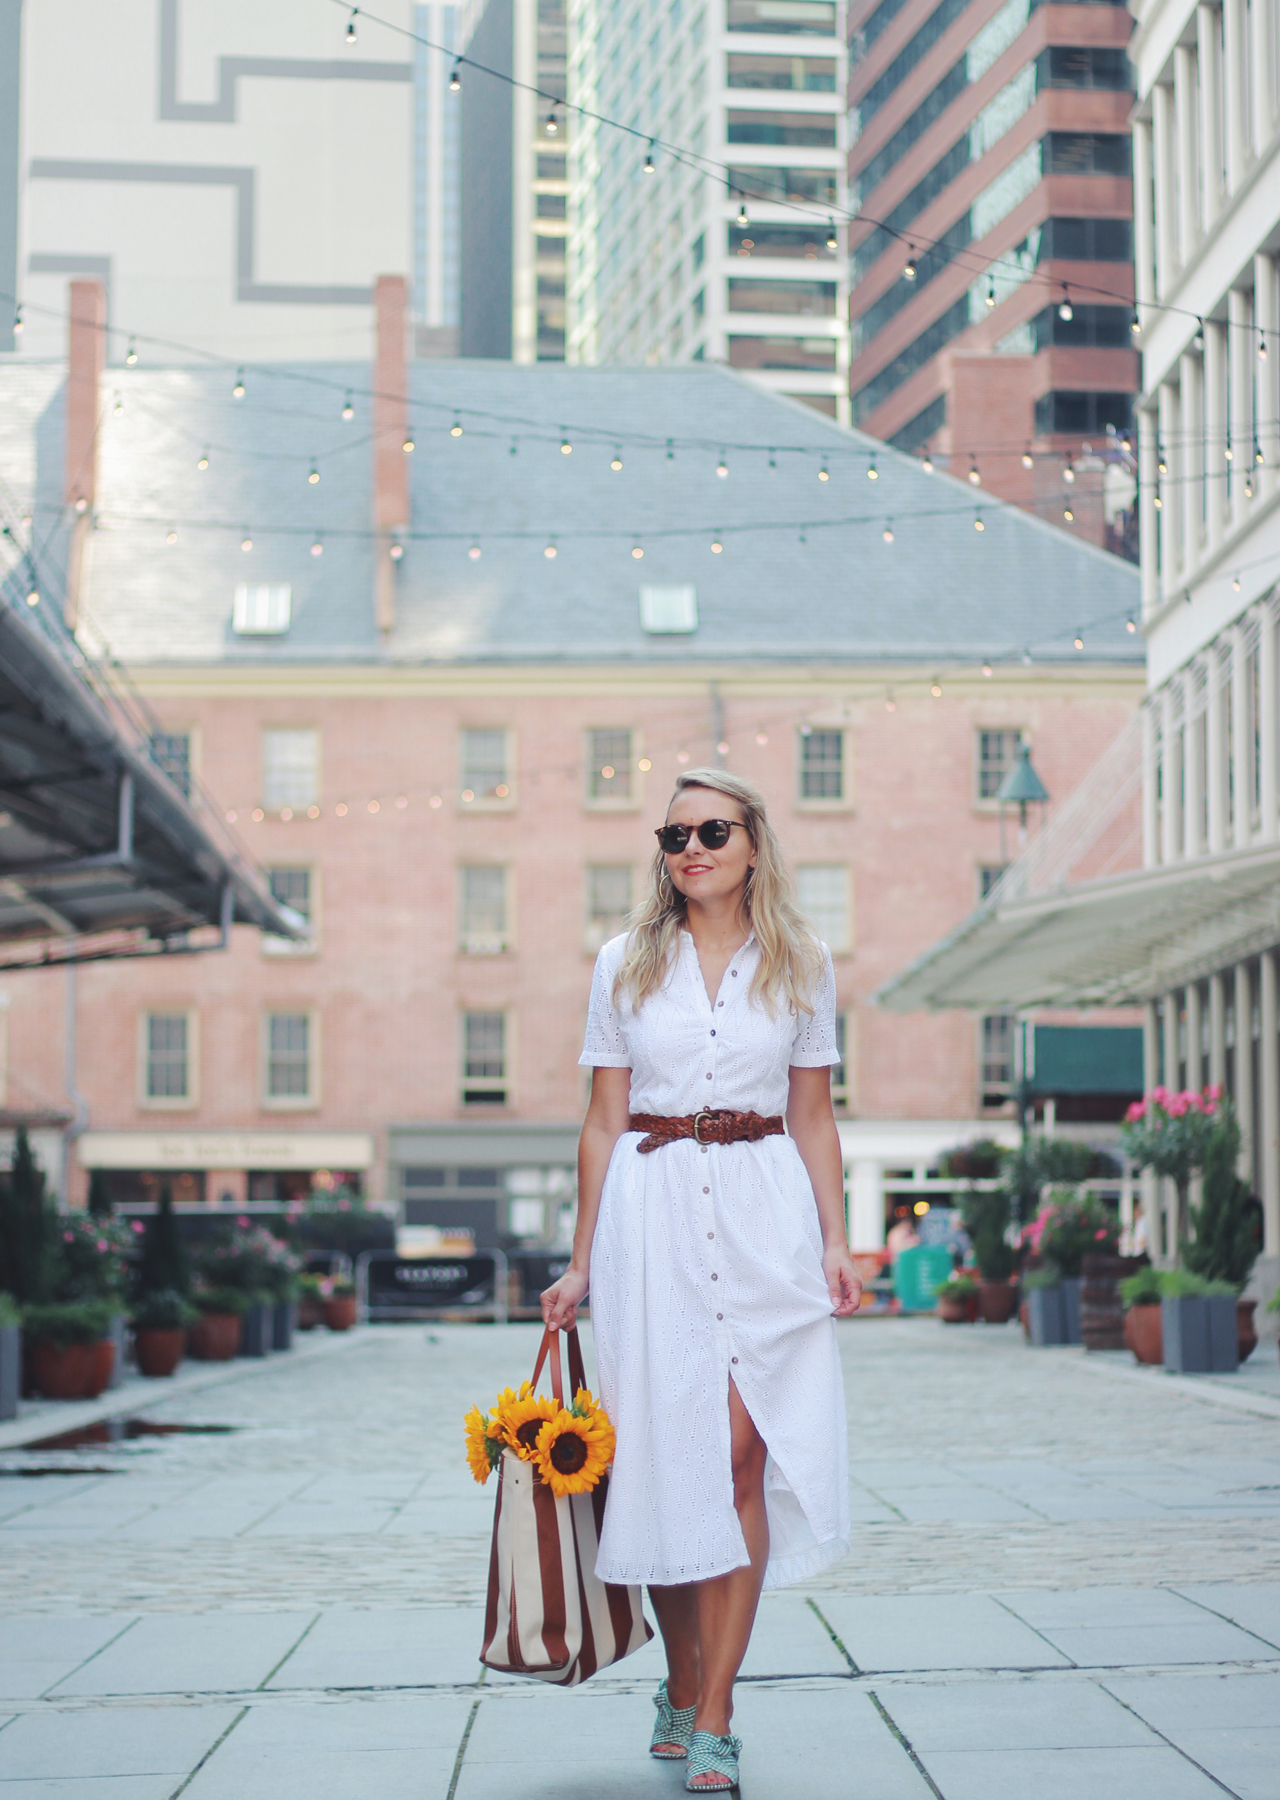 The Steele Maiden: Classic White Shirtdress at South Street Seaport